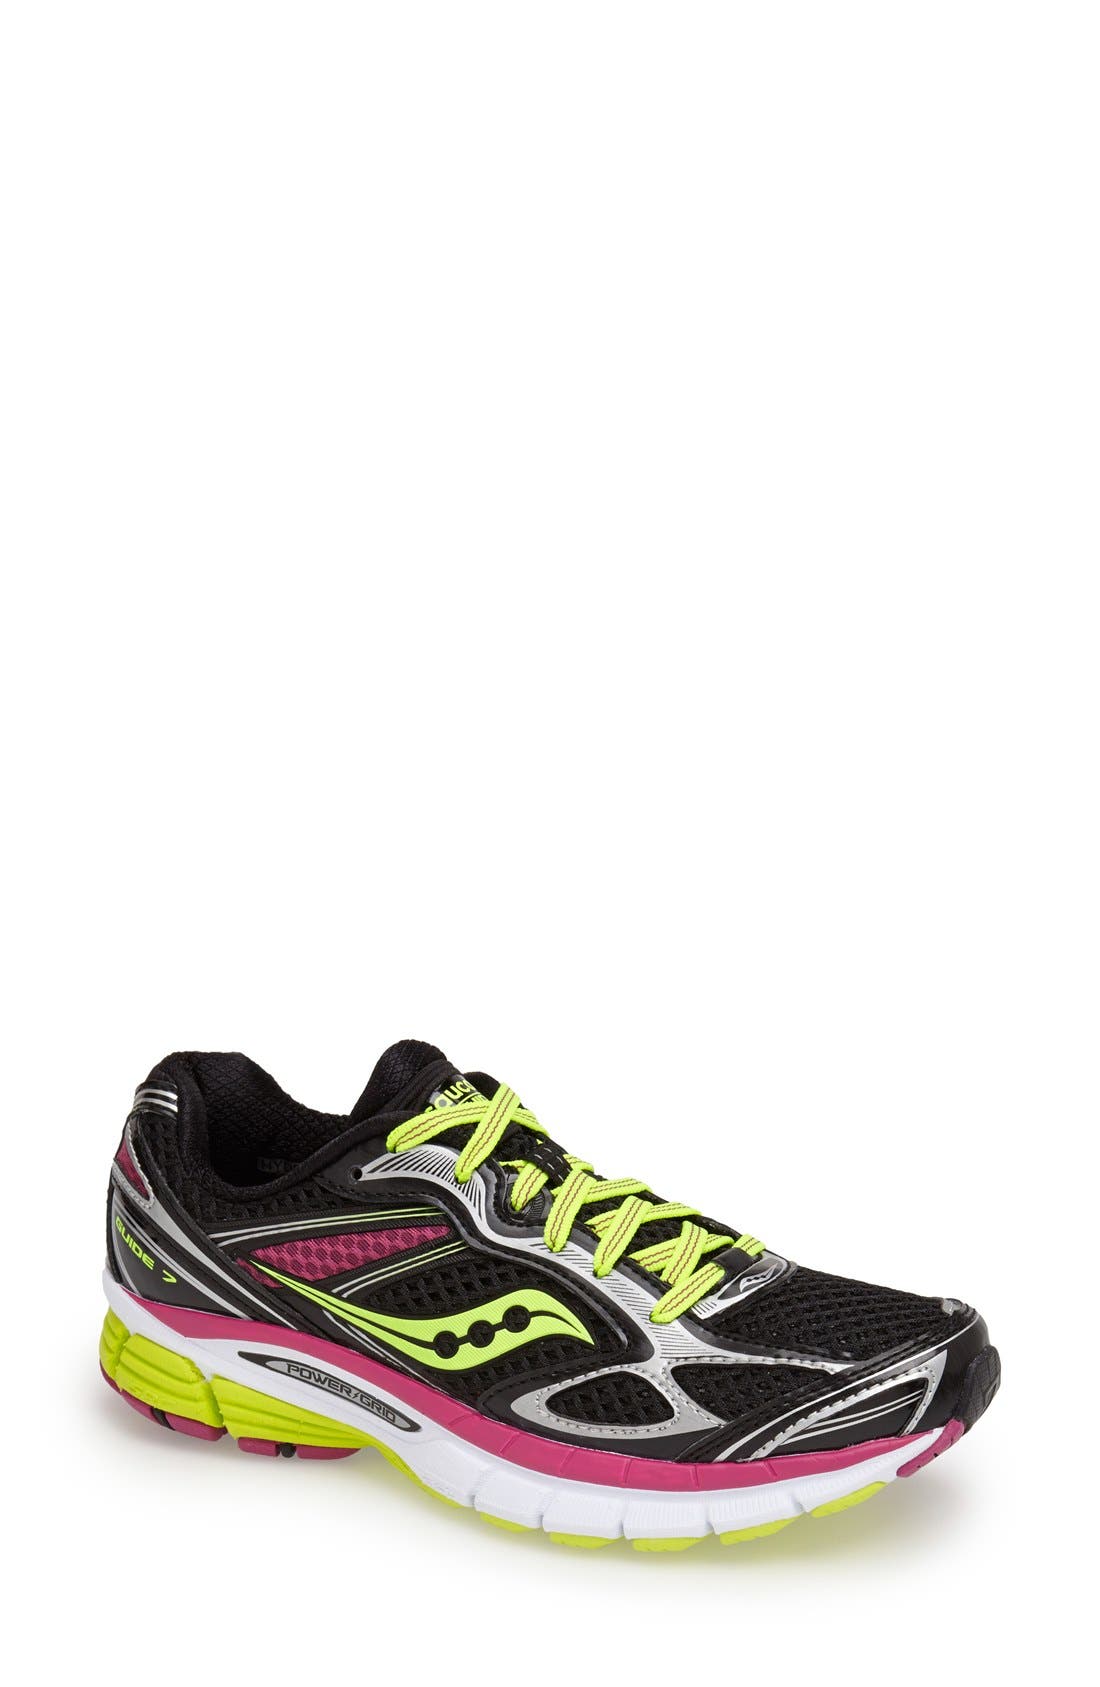 saucony guide 7 running